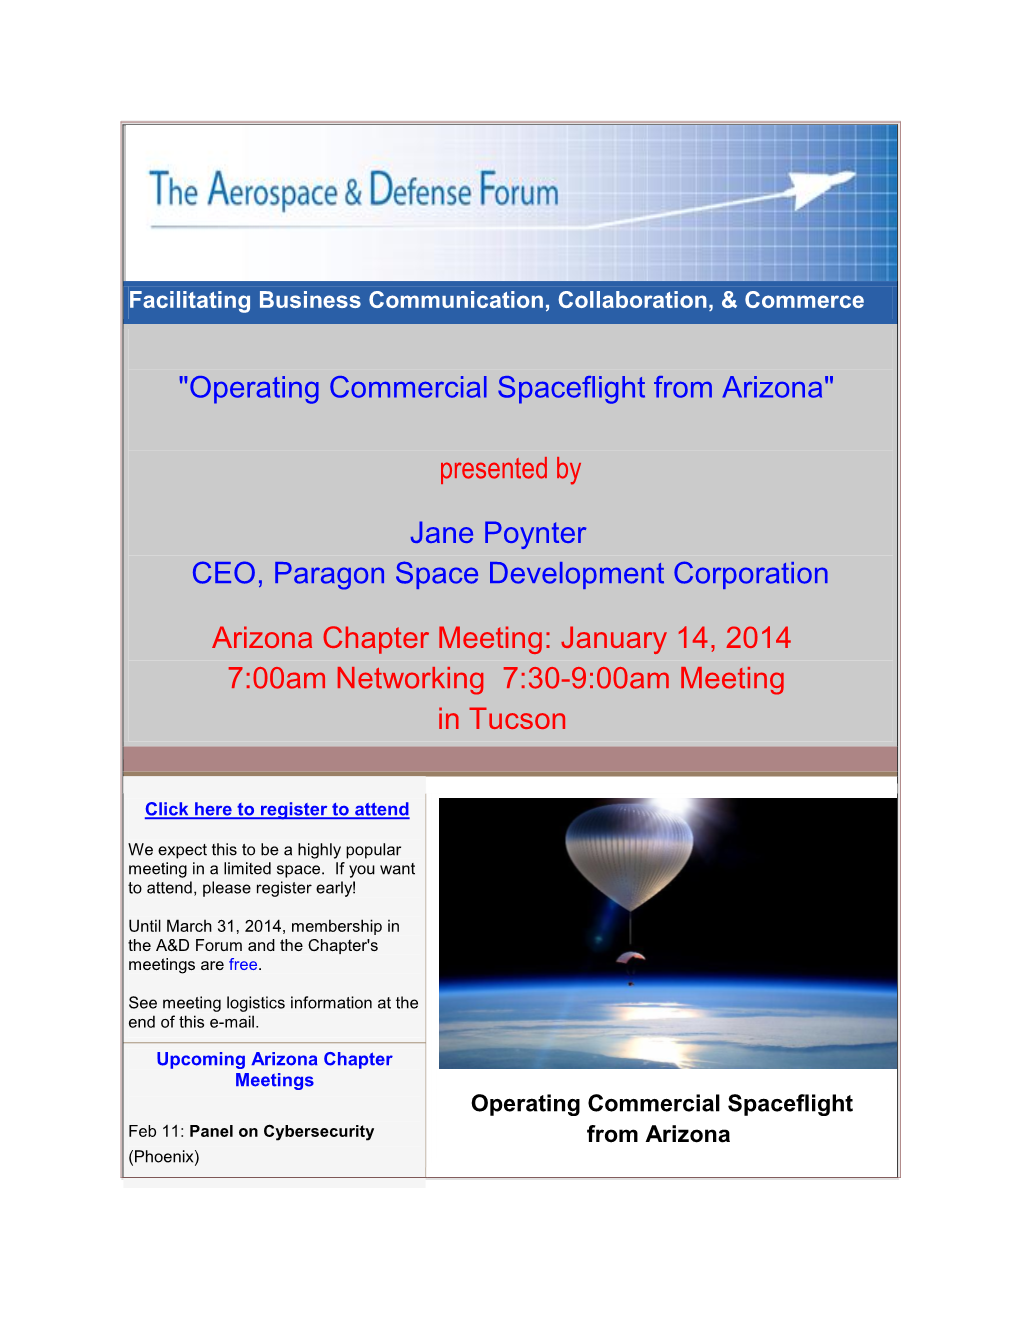 "Operating Commercial Spaceflight from Arizona" Presented by Jane